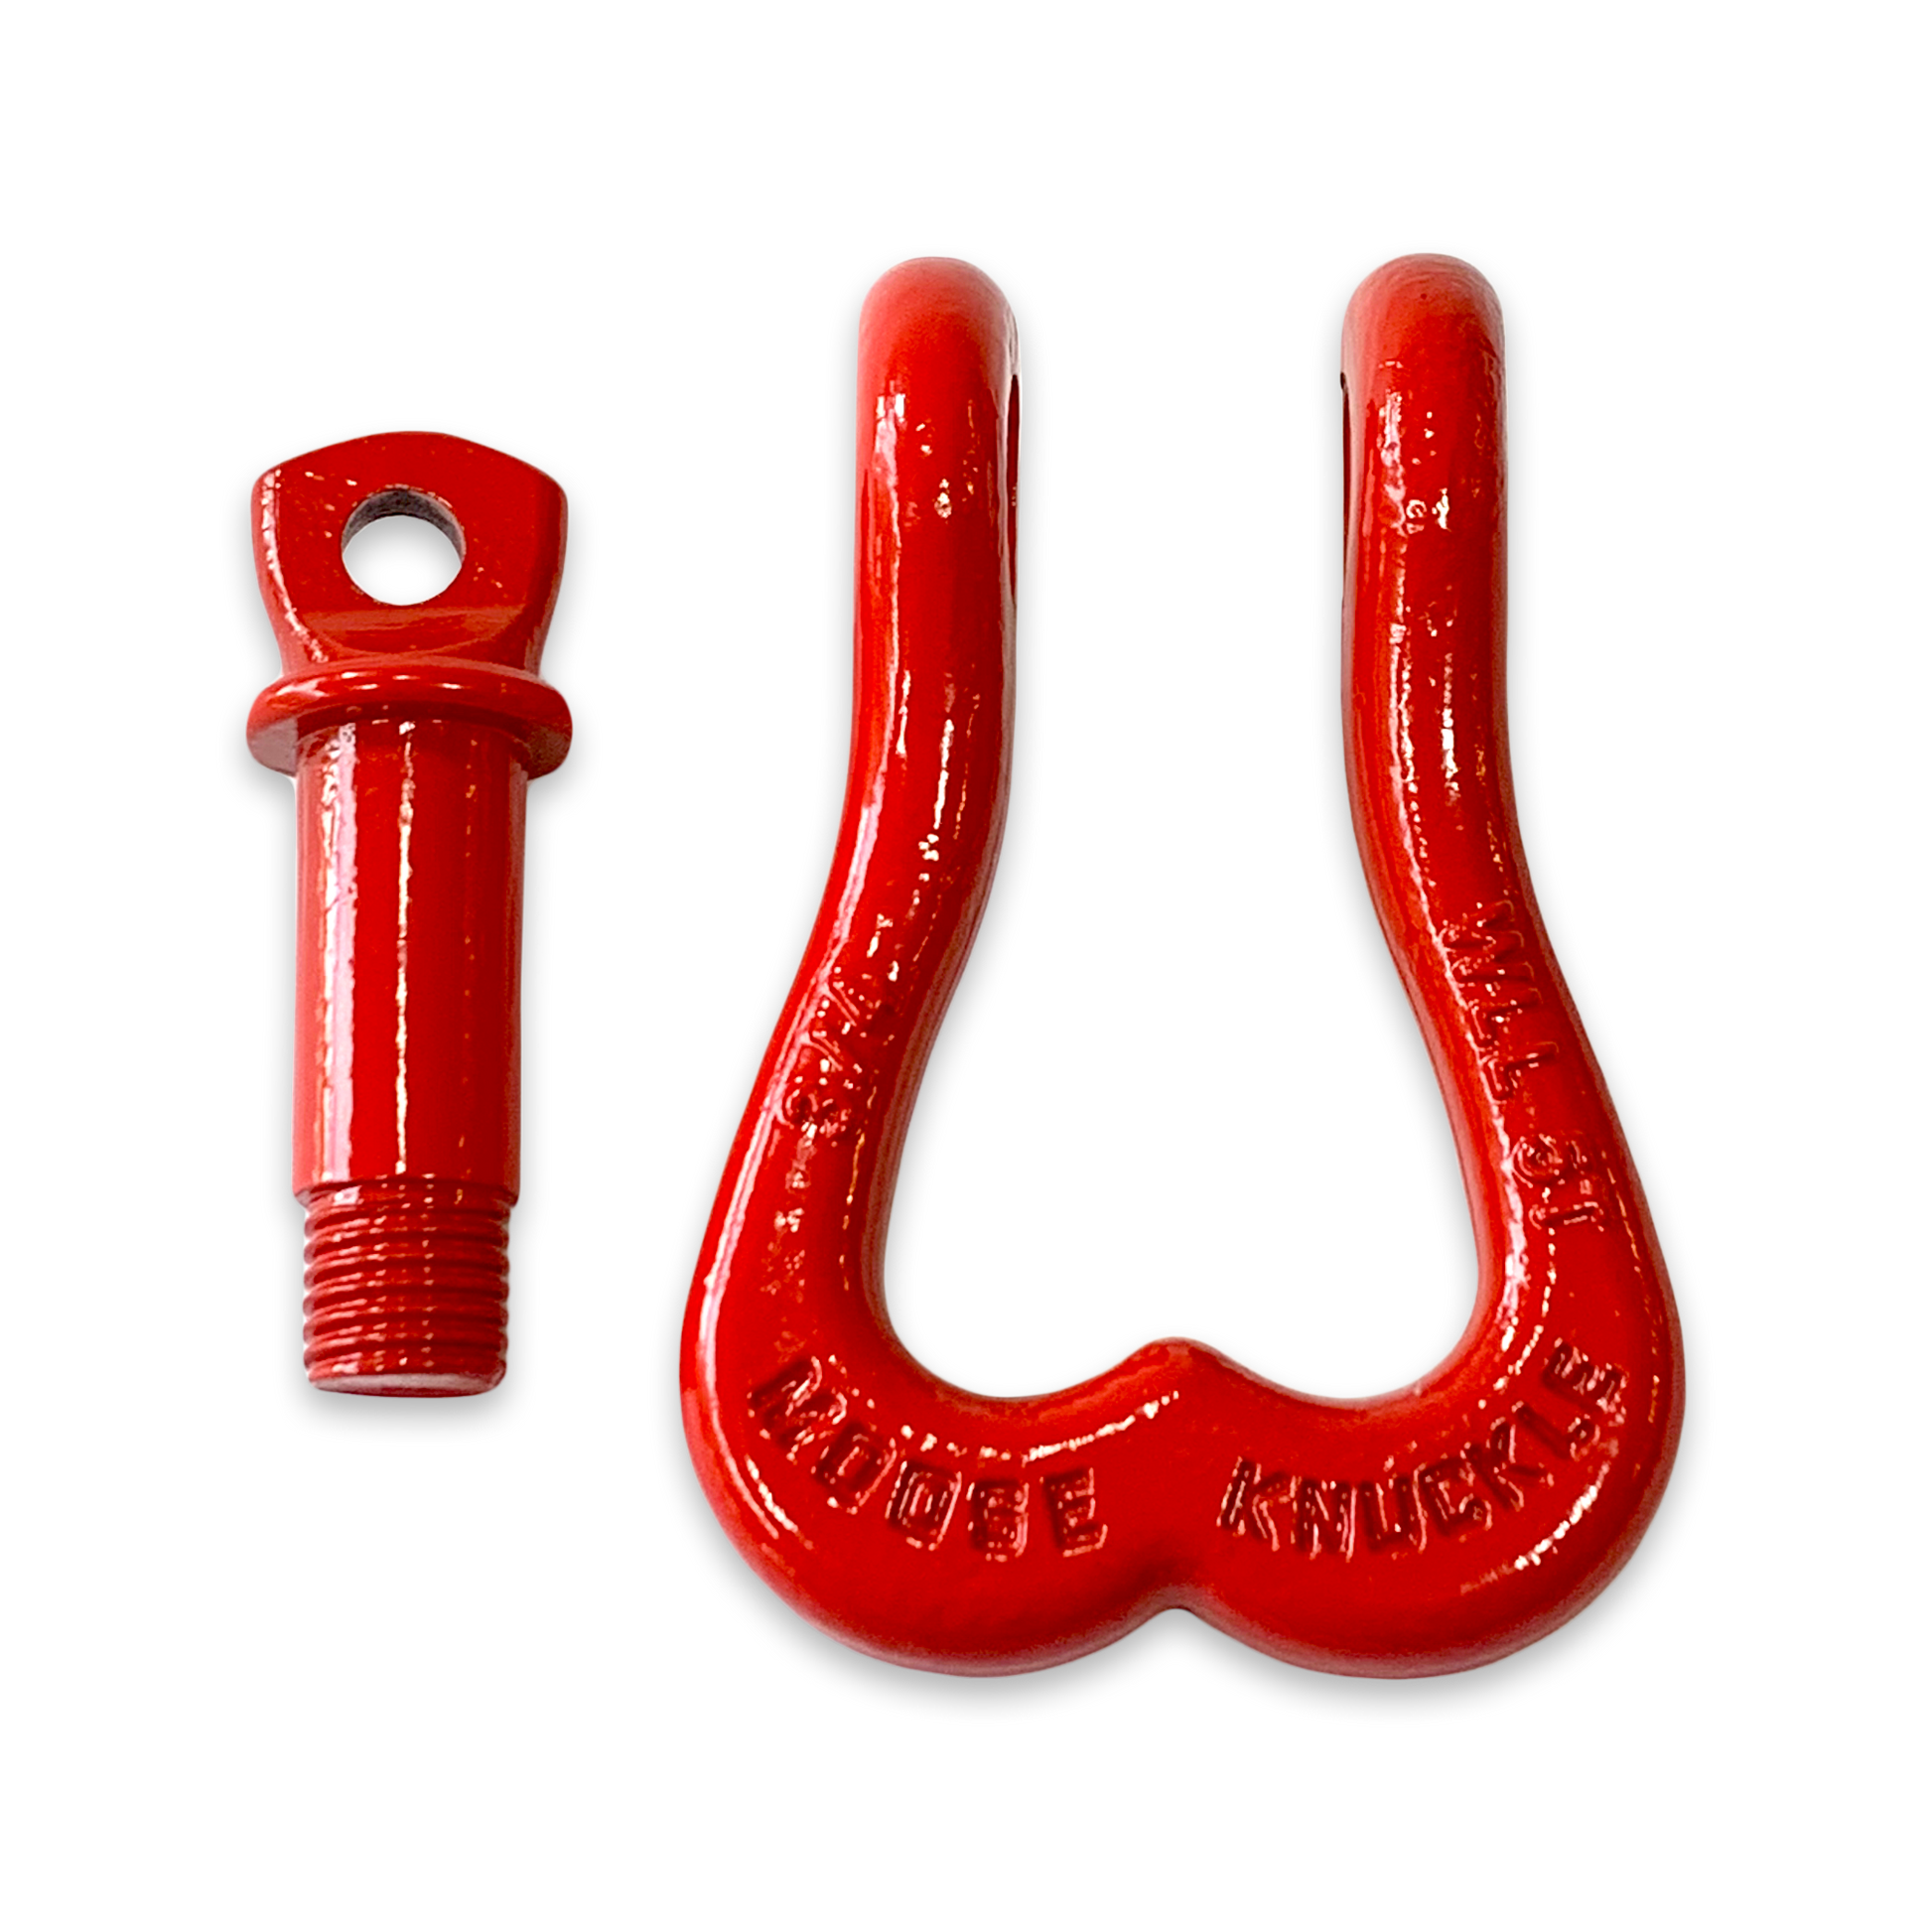 Moose Knuckle XL Flame Red Heavy Duty Extra Strong Patent Pending 3/4" Shackle for Off-Road Vehicle Recovery to Replace Bull Balls